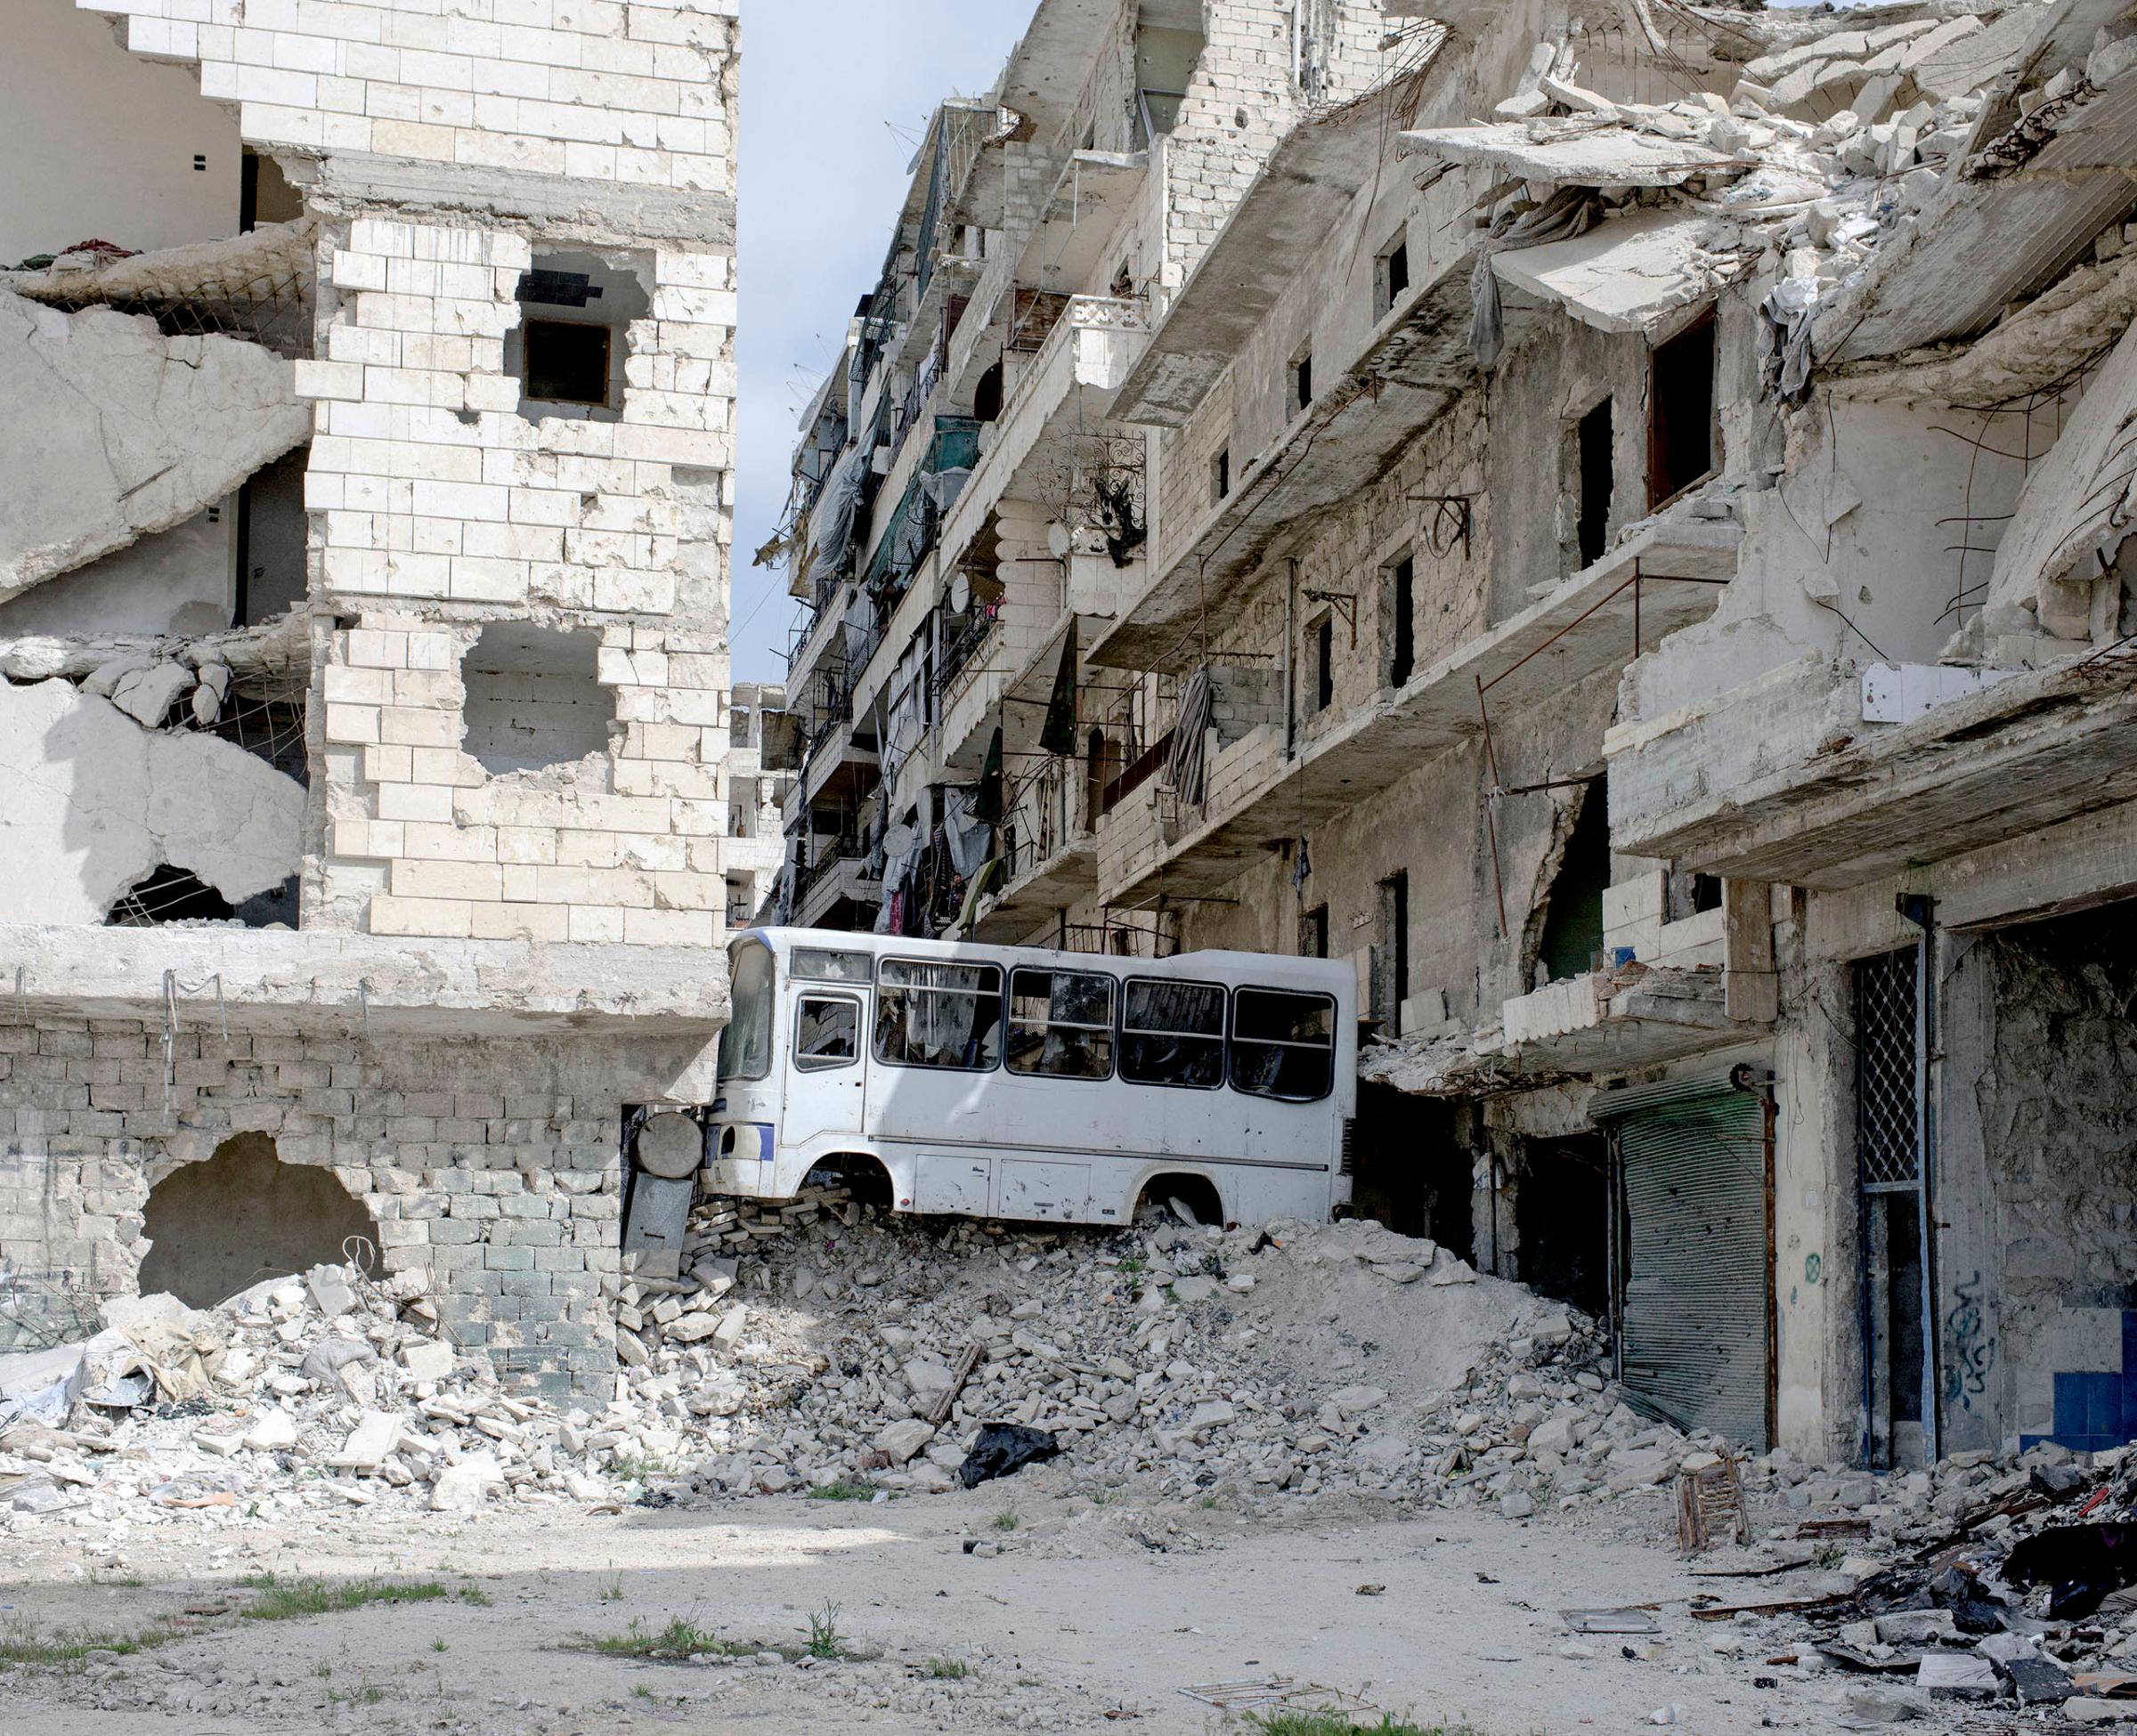 In the Salaheddin district, which is only 50% under government control, streets are blocked off with rubble and a bus. Aleppo, Syria, March 2016.